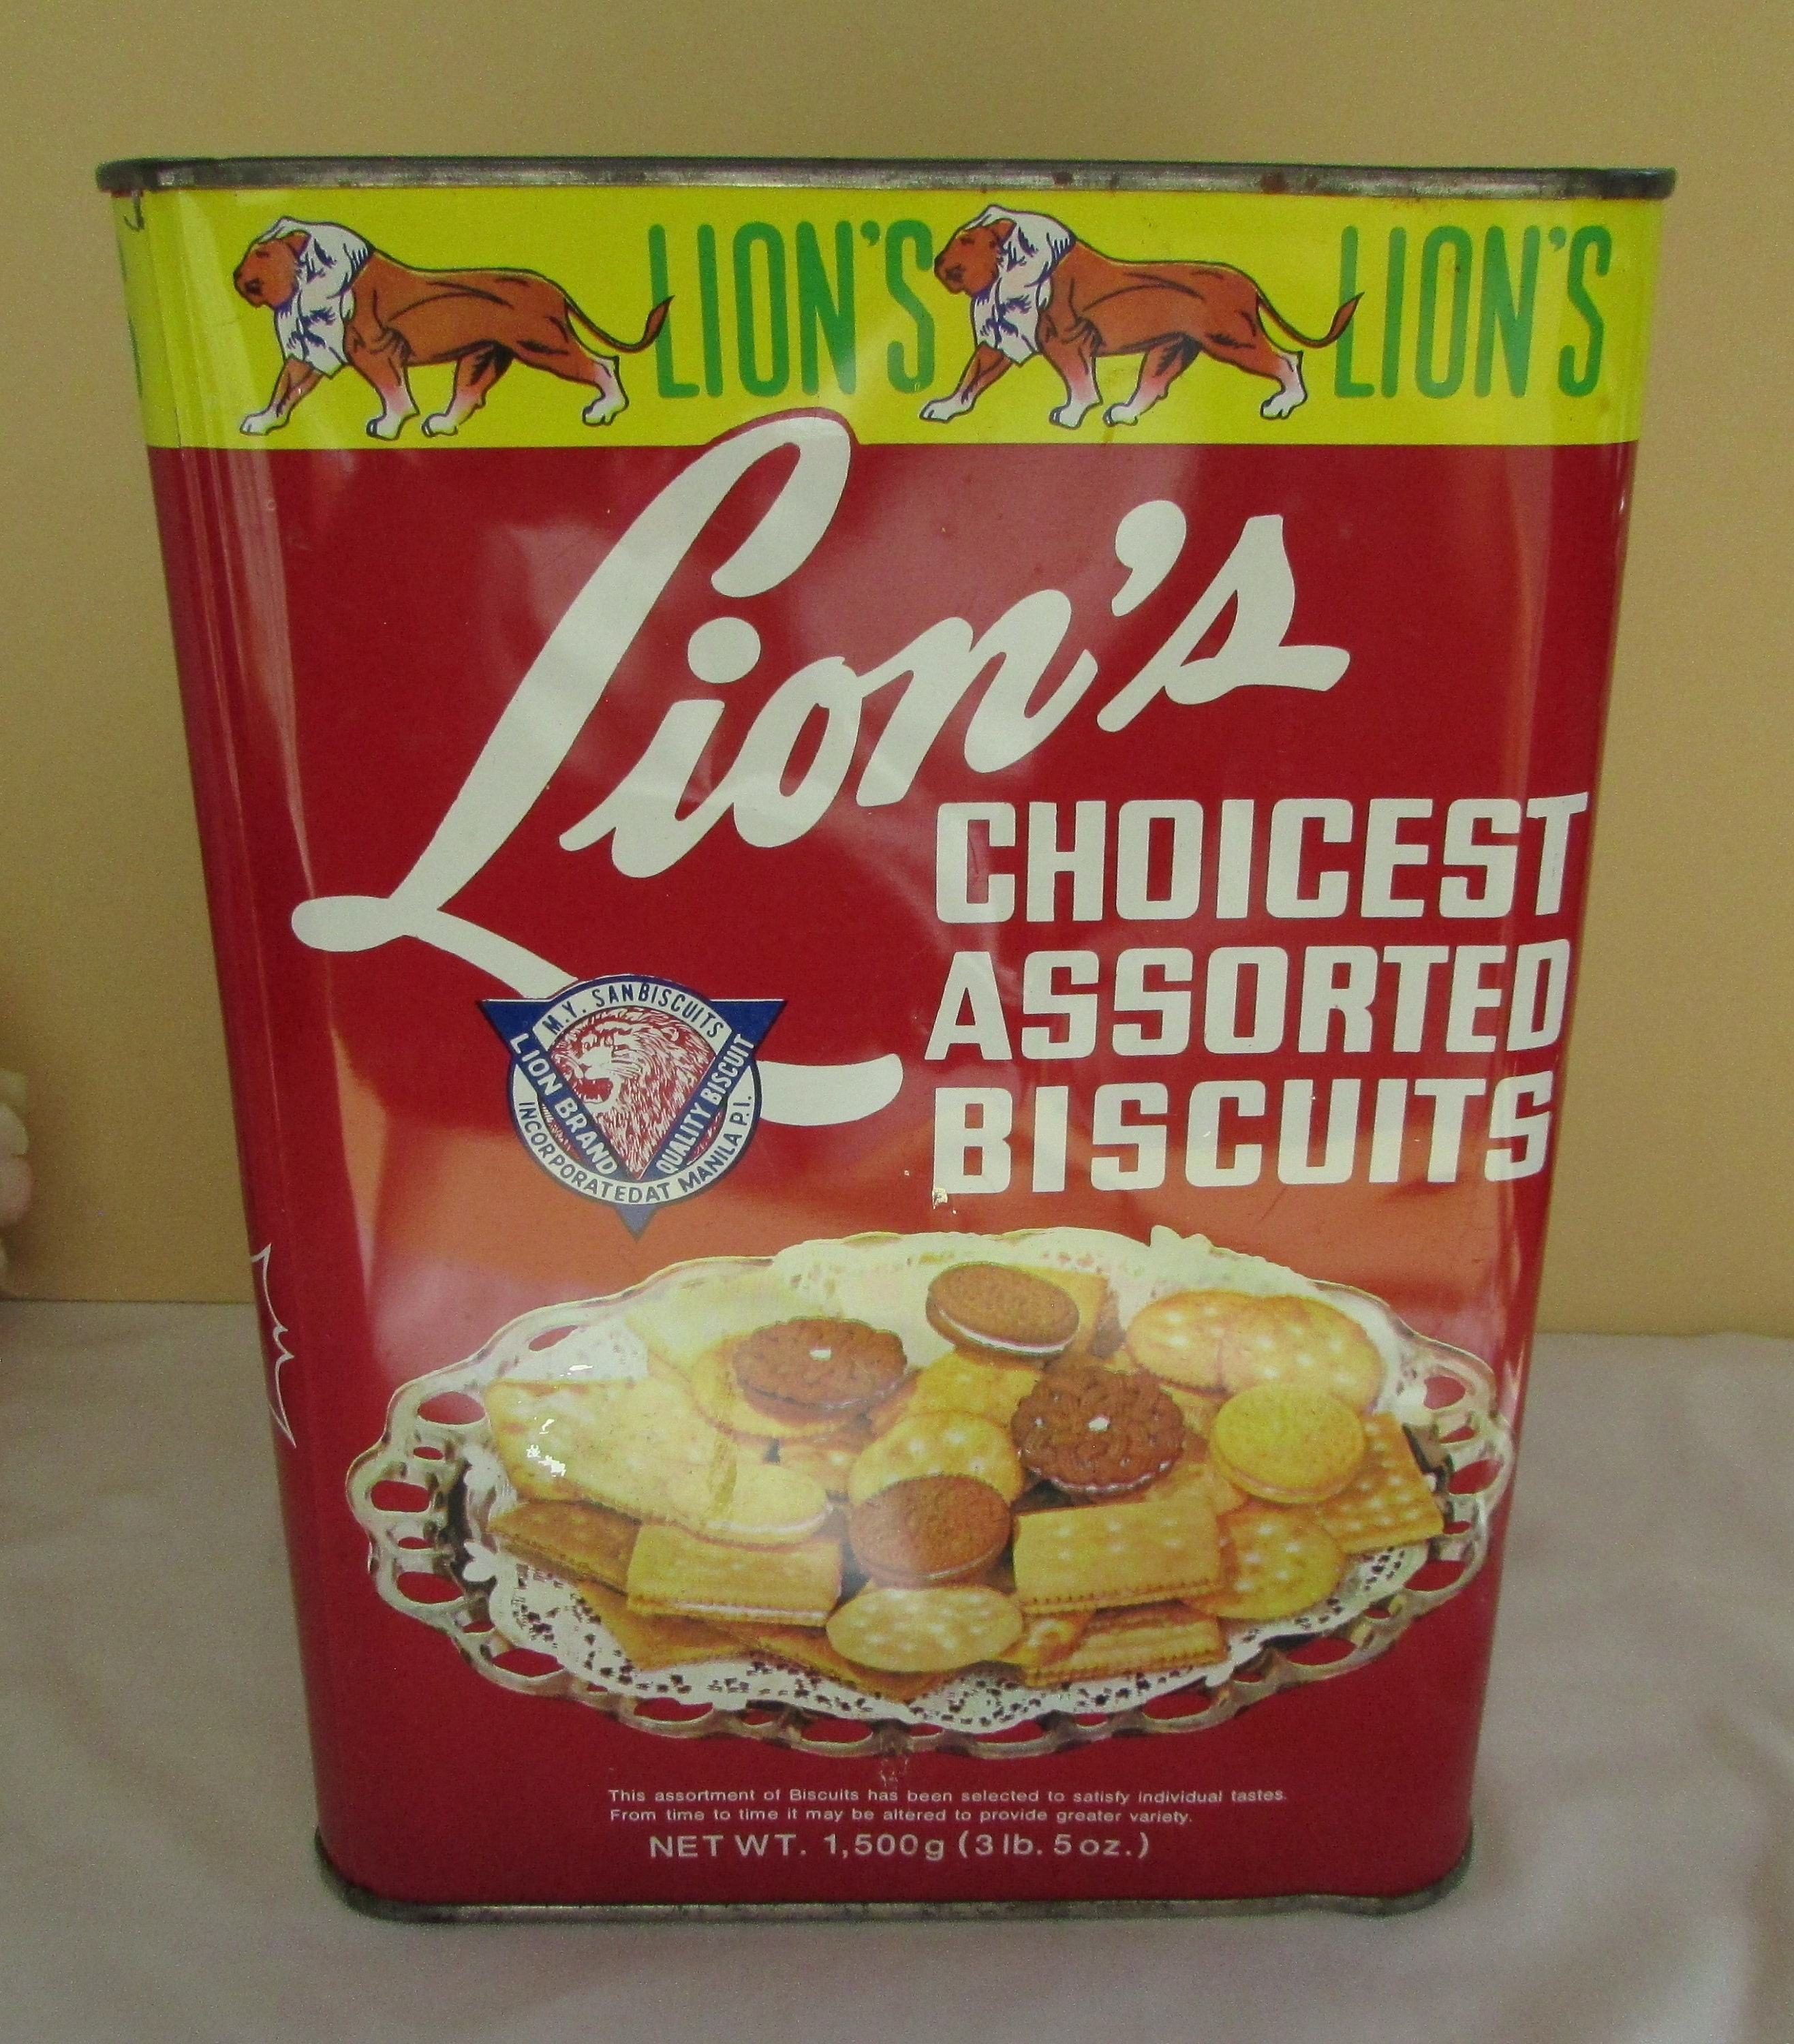 What materials are commonly used to make Biscuit Tin Boxes?